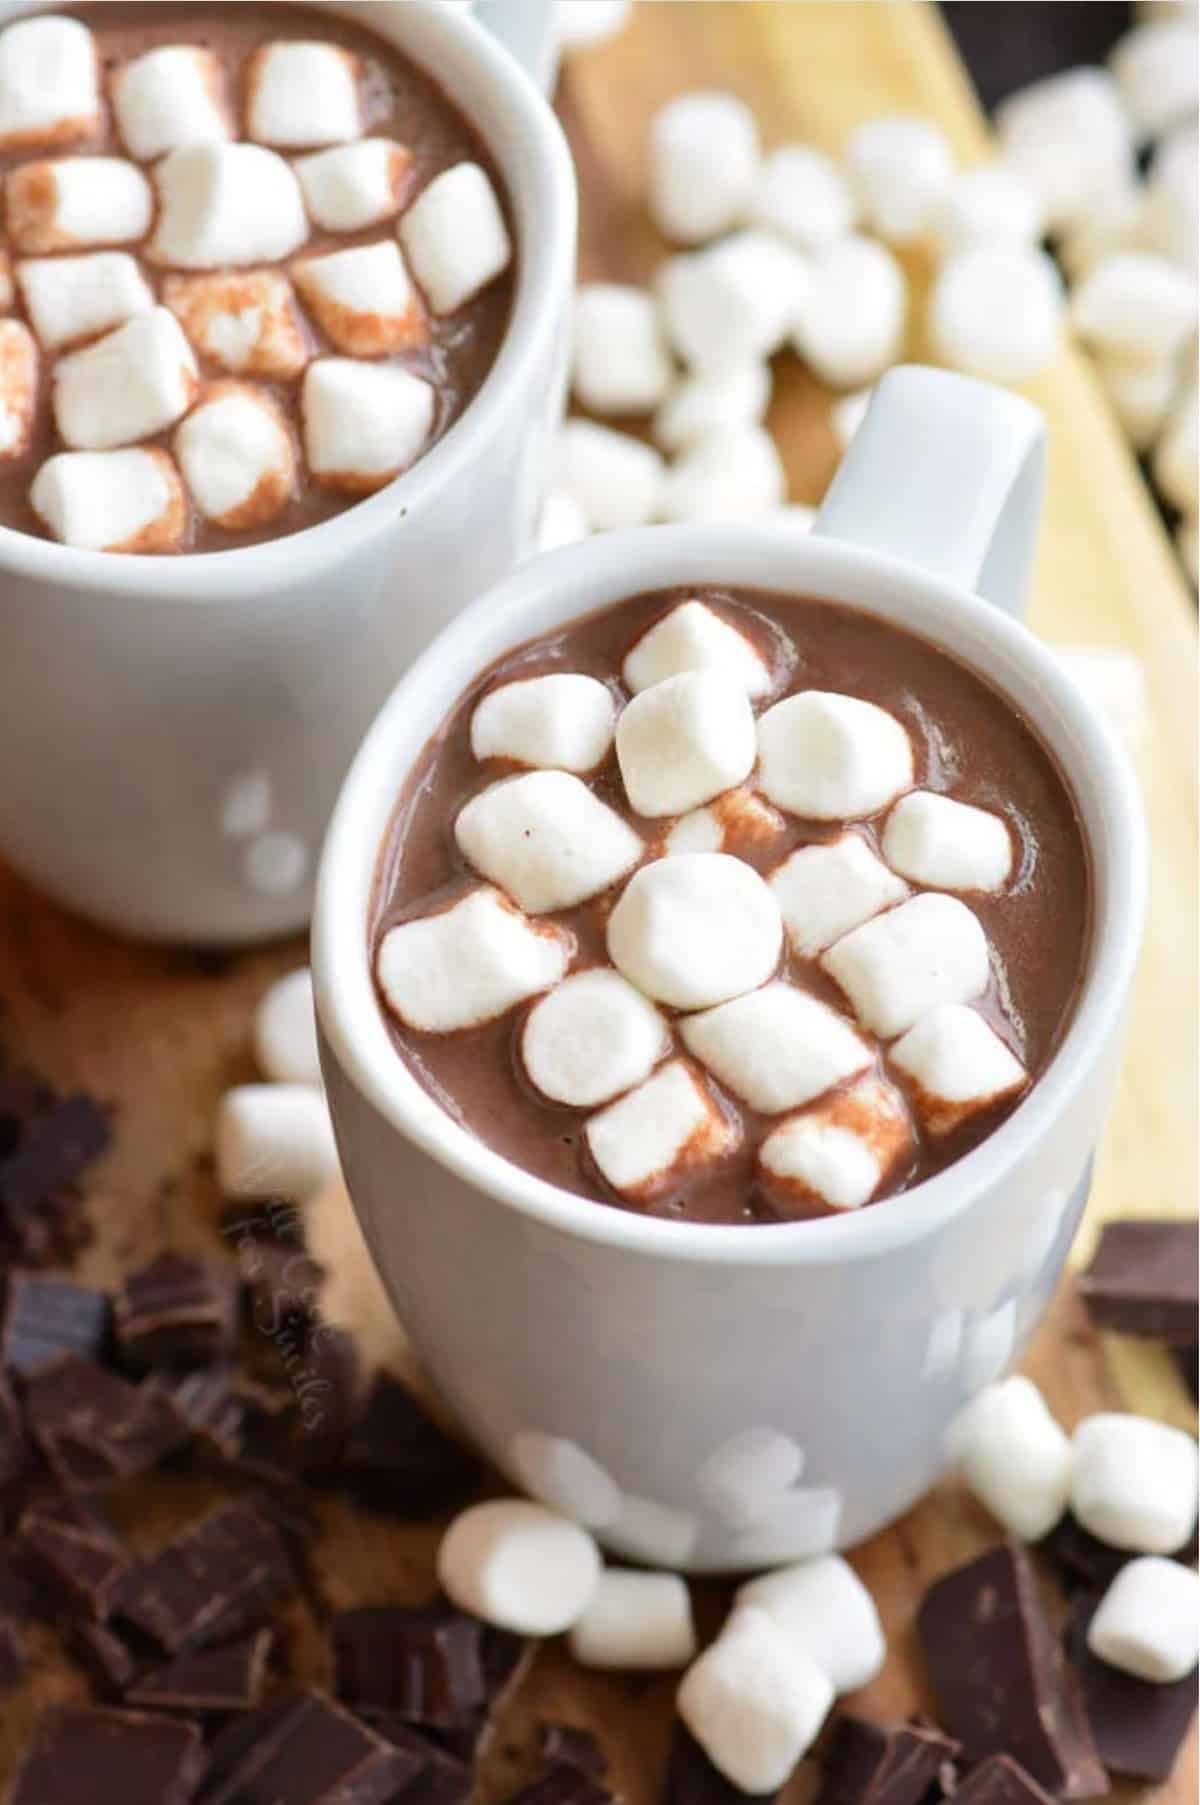 two mugs of hot chocolate with marshmallows in on top and sliced chocolate and marshmallows aground the bottom.